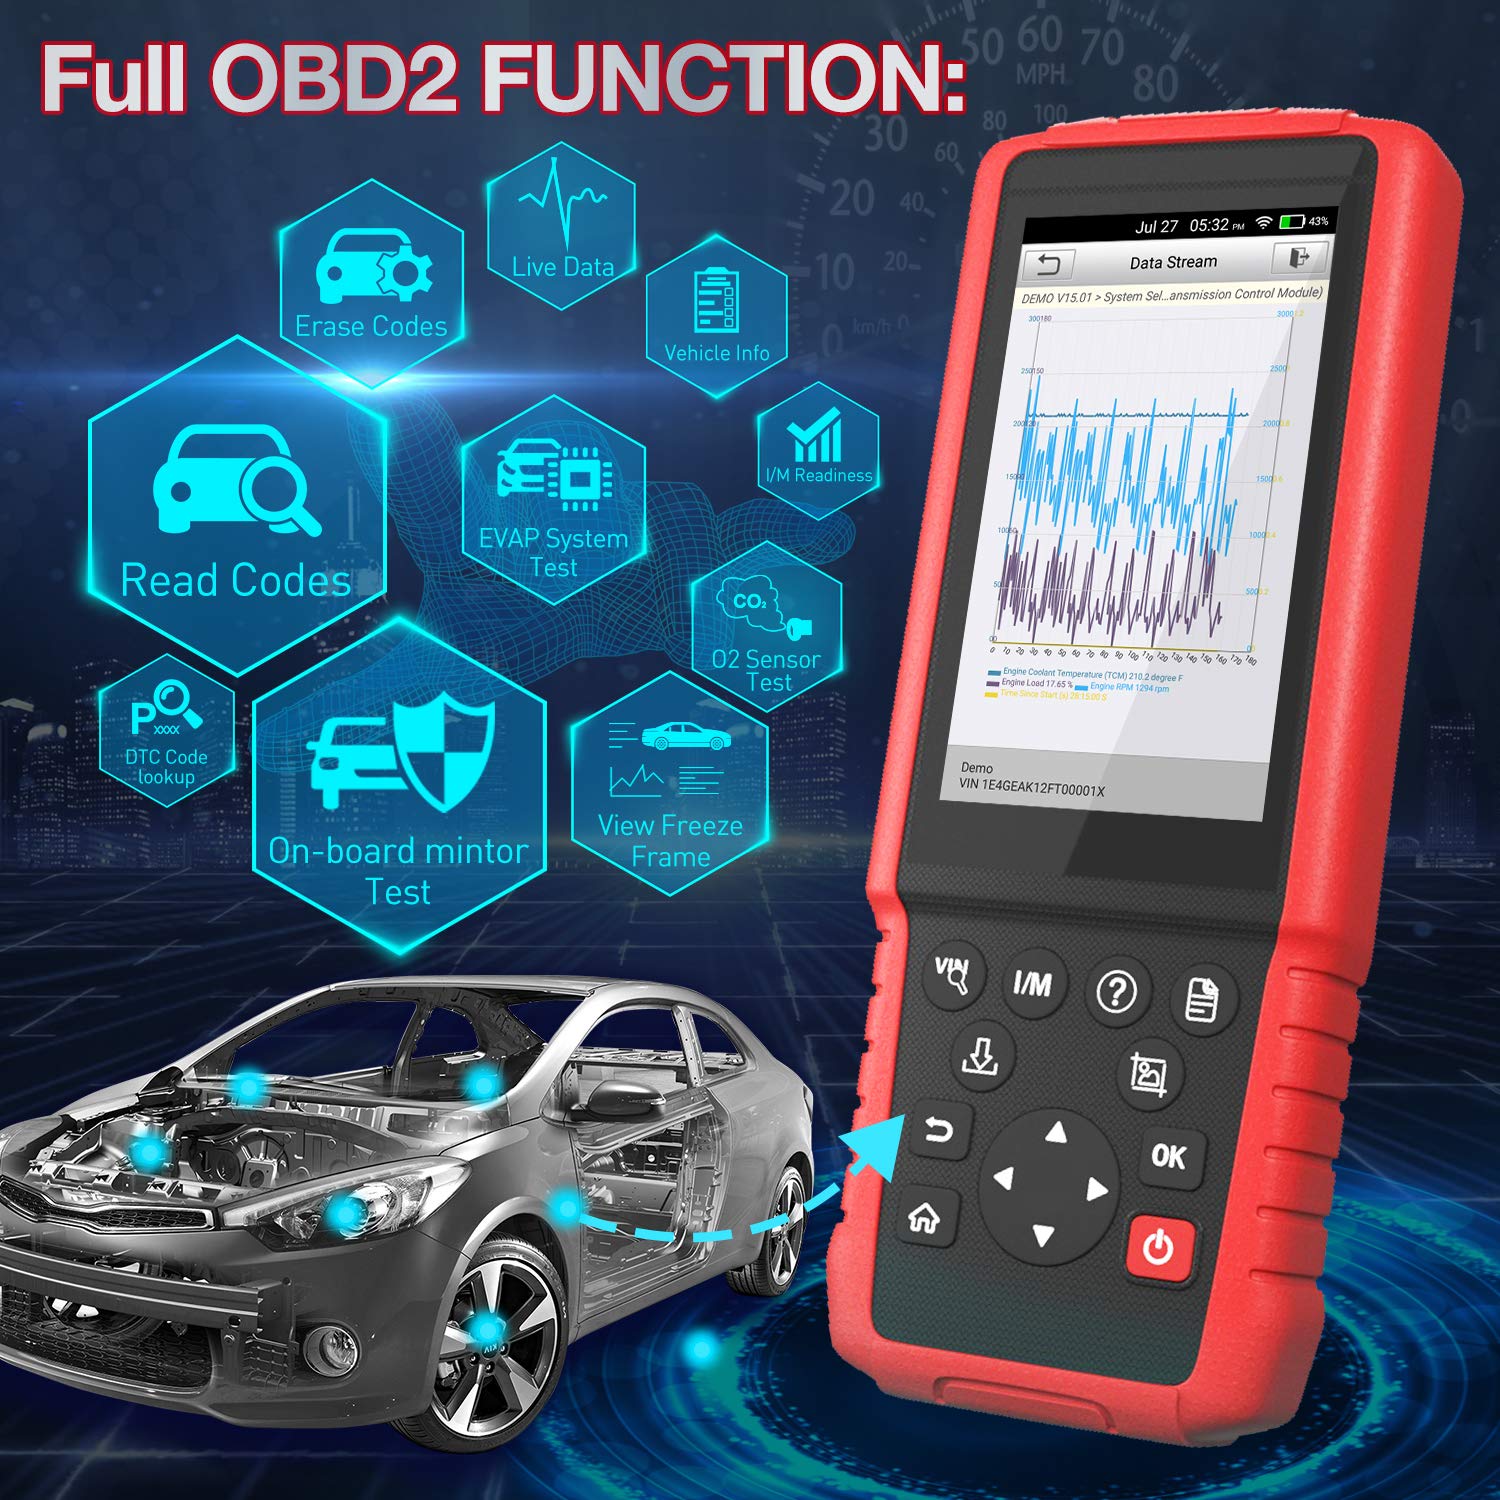 LAUNCH X431 CRP429C OBD2 full funtions